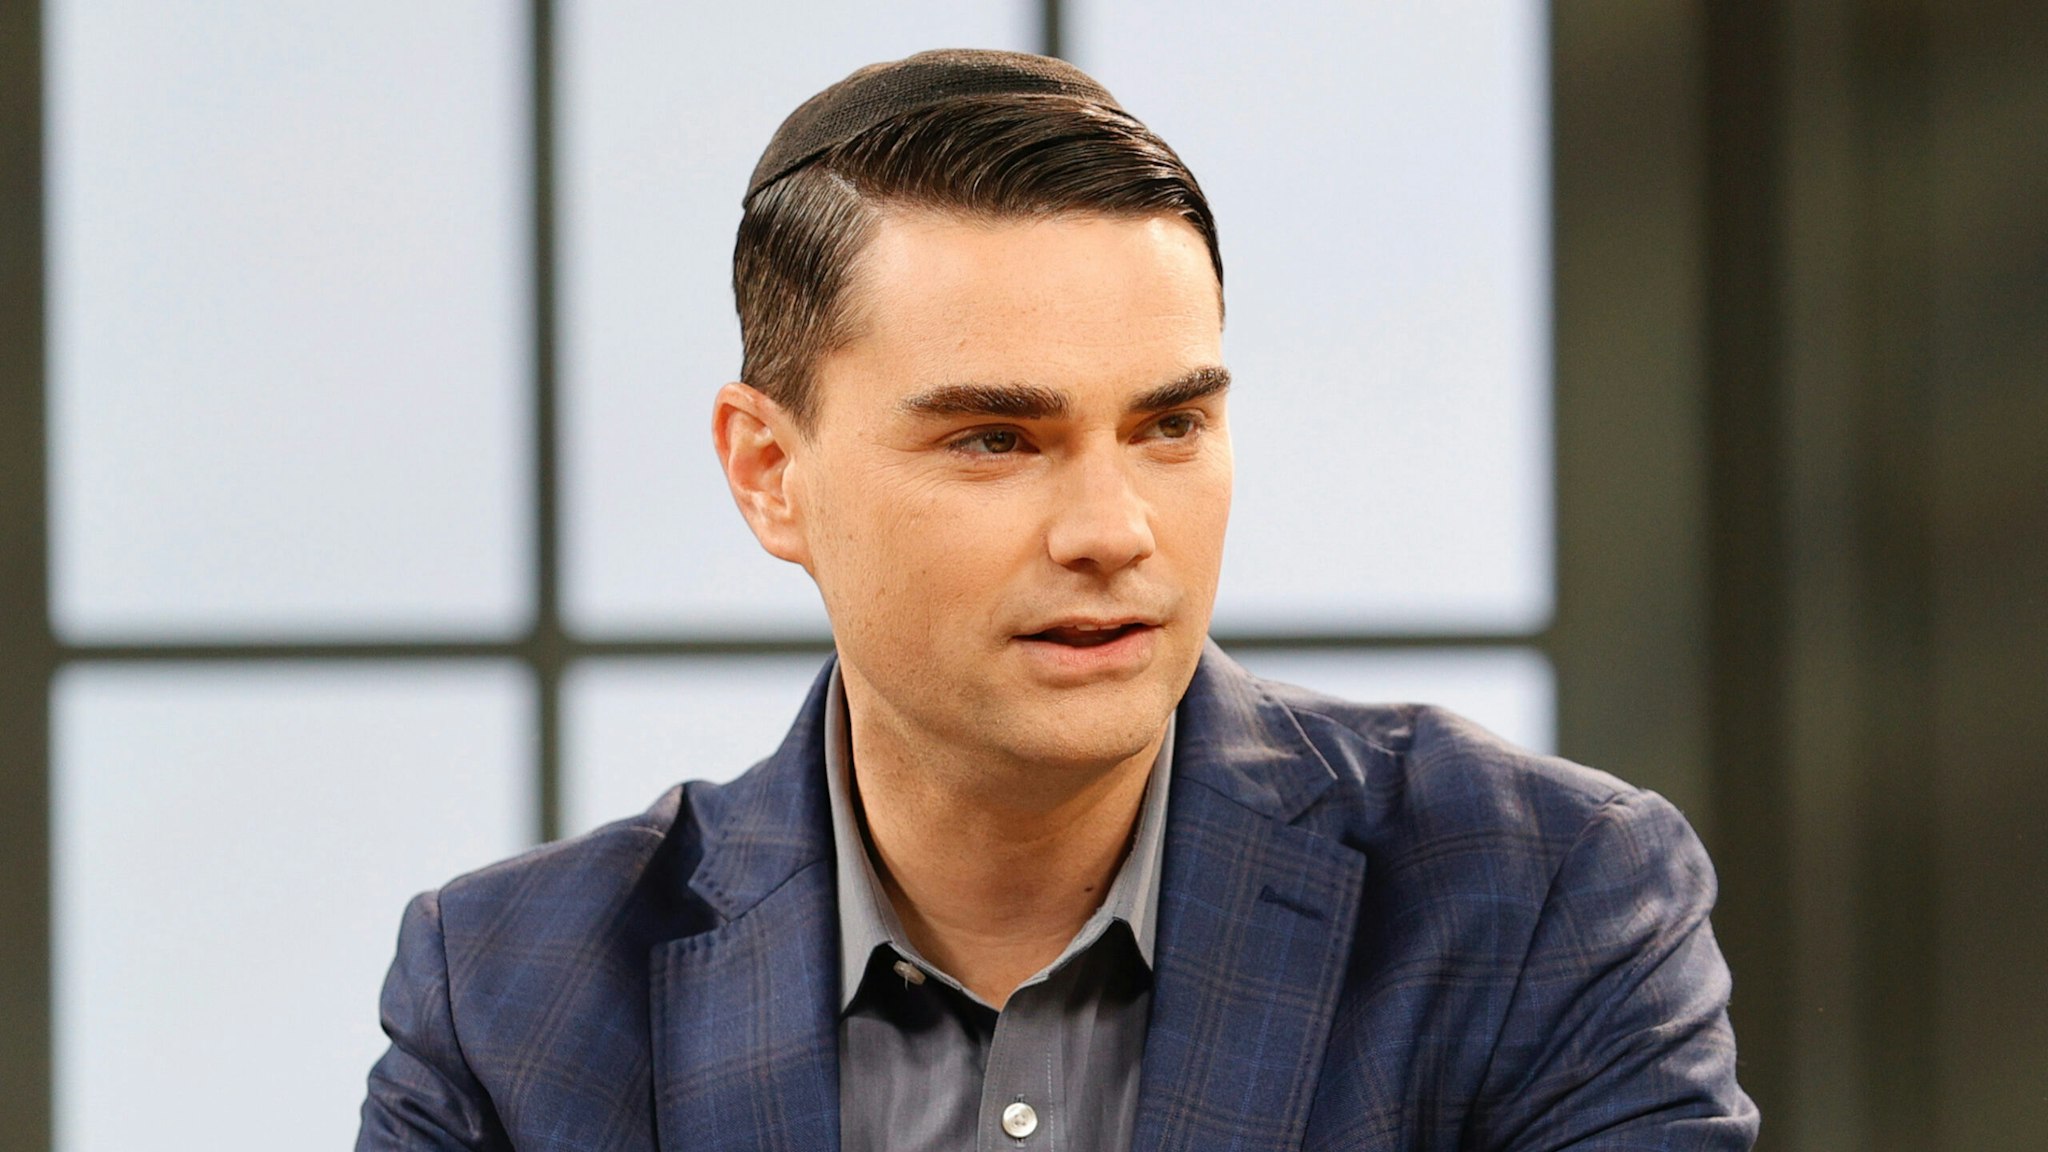 American commentator Ben Shapiro is seen on set during a taping of "Candace" on March 17, 2021 in Nashville, Tennessee.